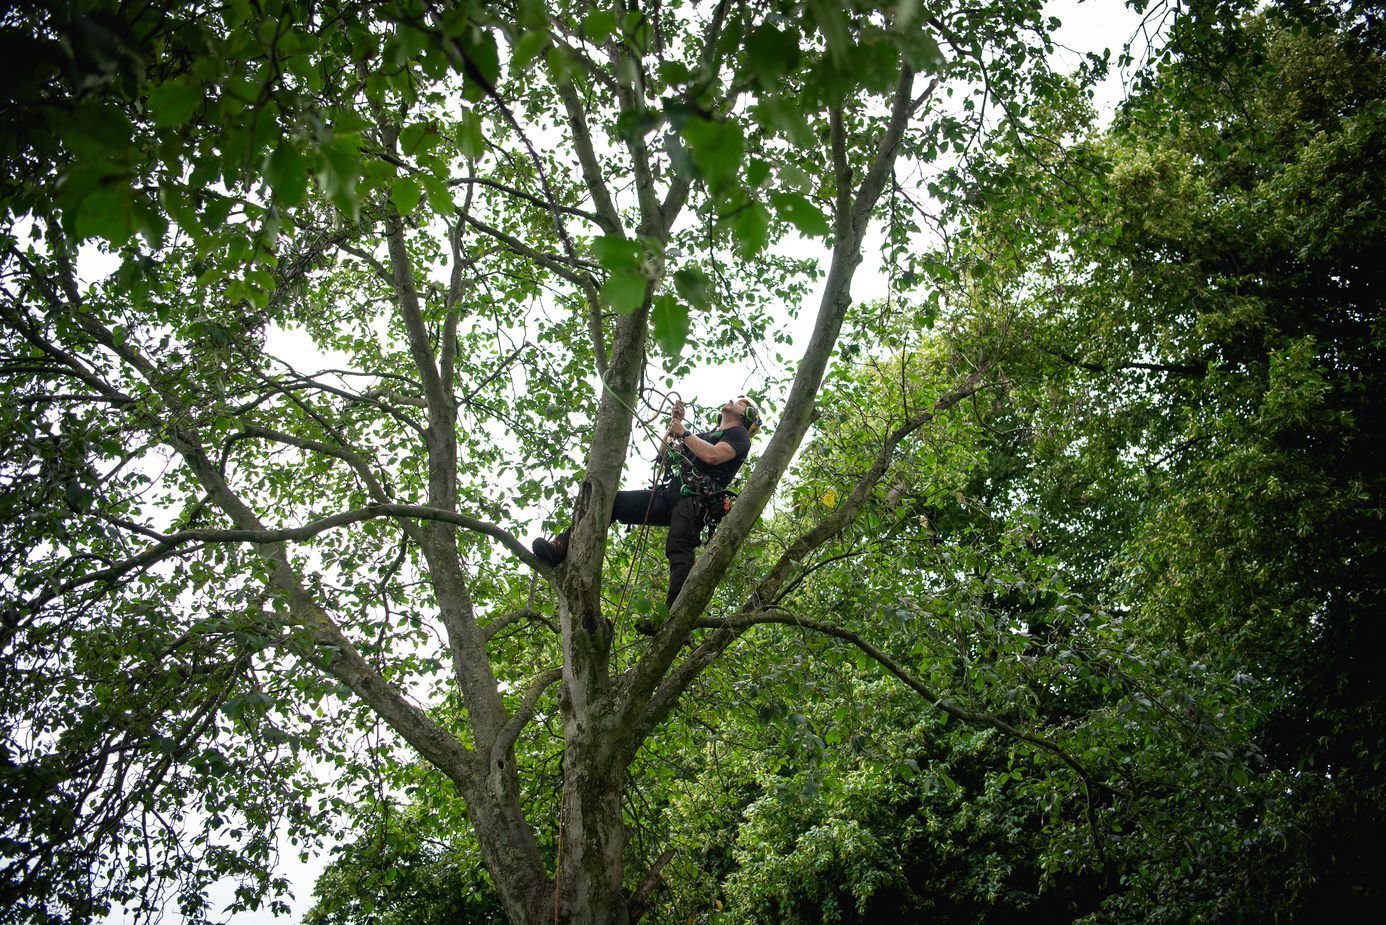 UK Providers of Forest Worker Injury Care Training